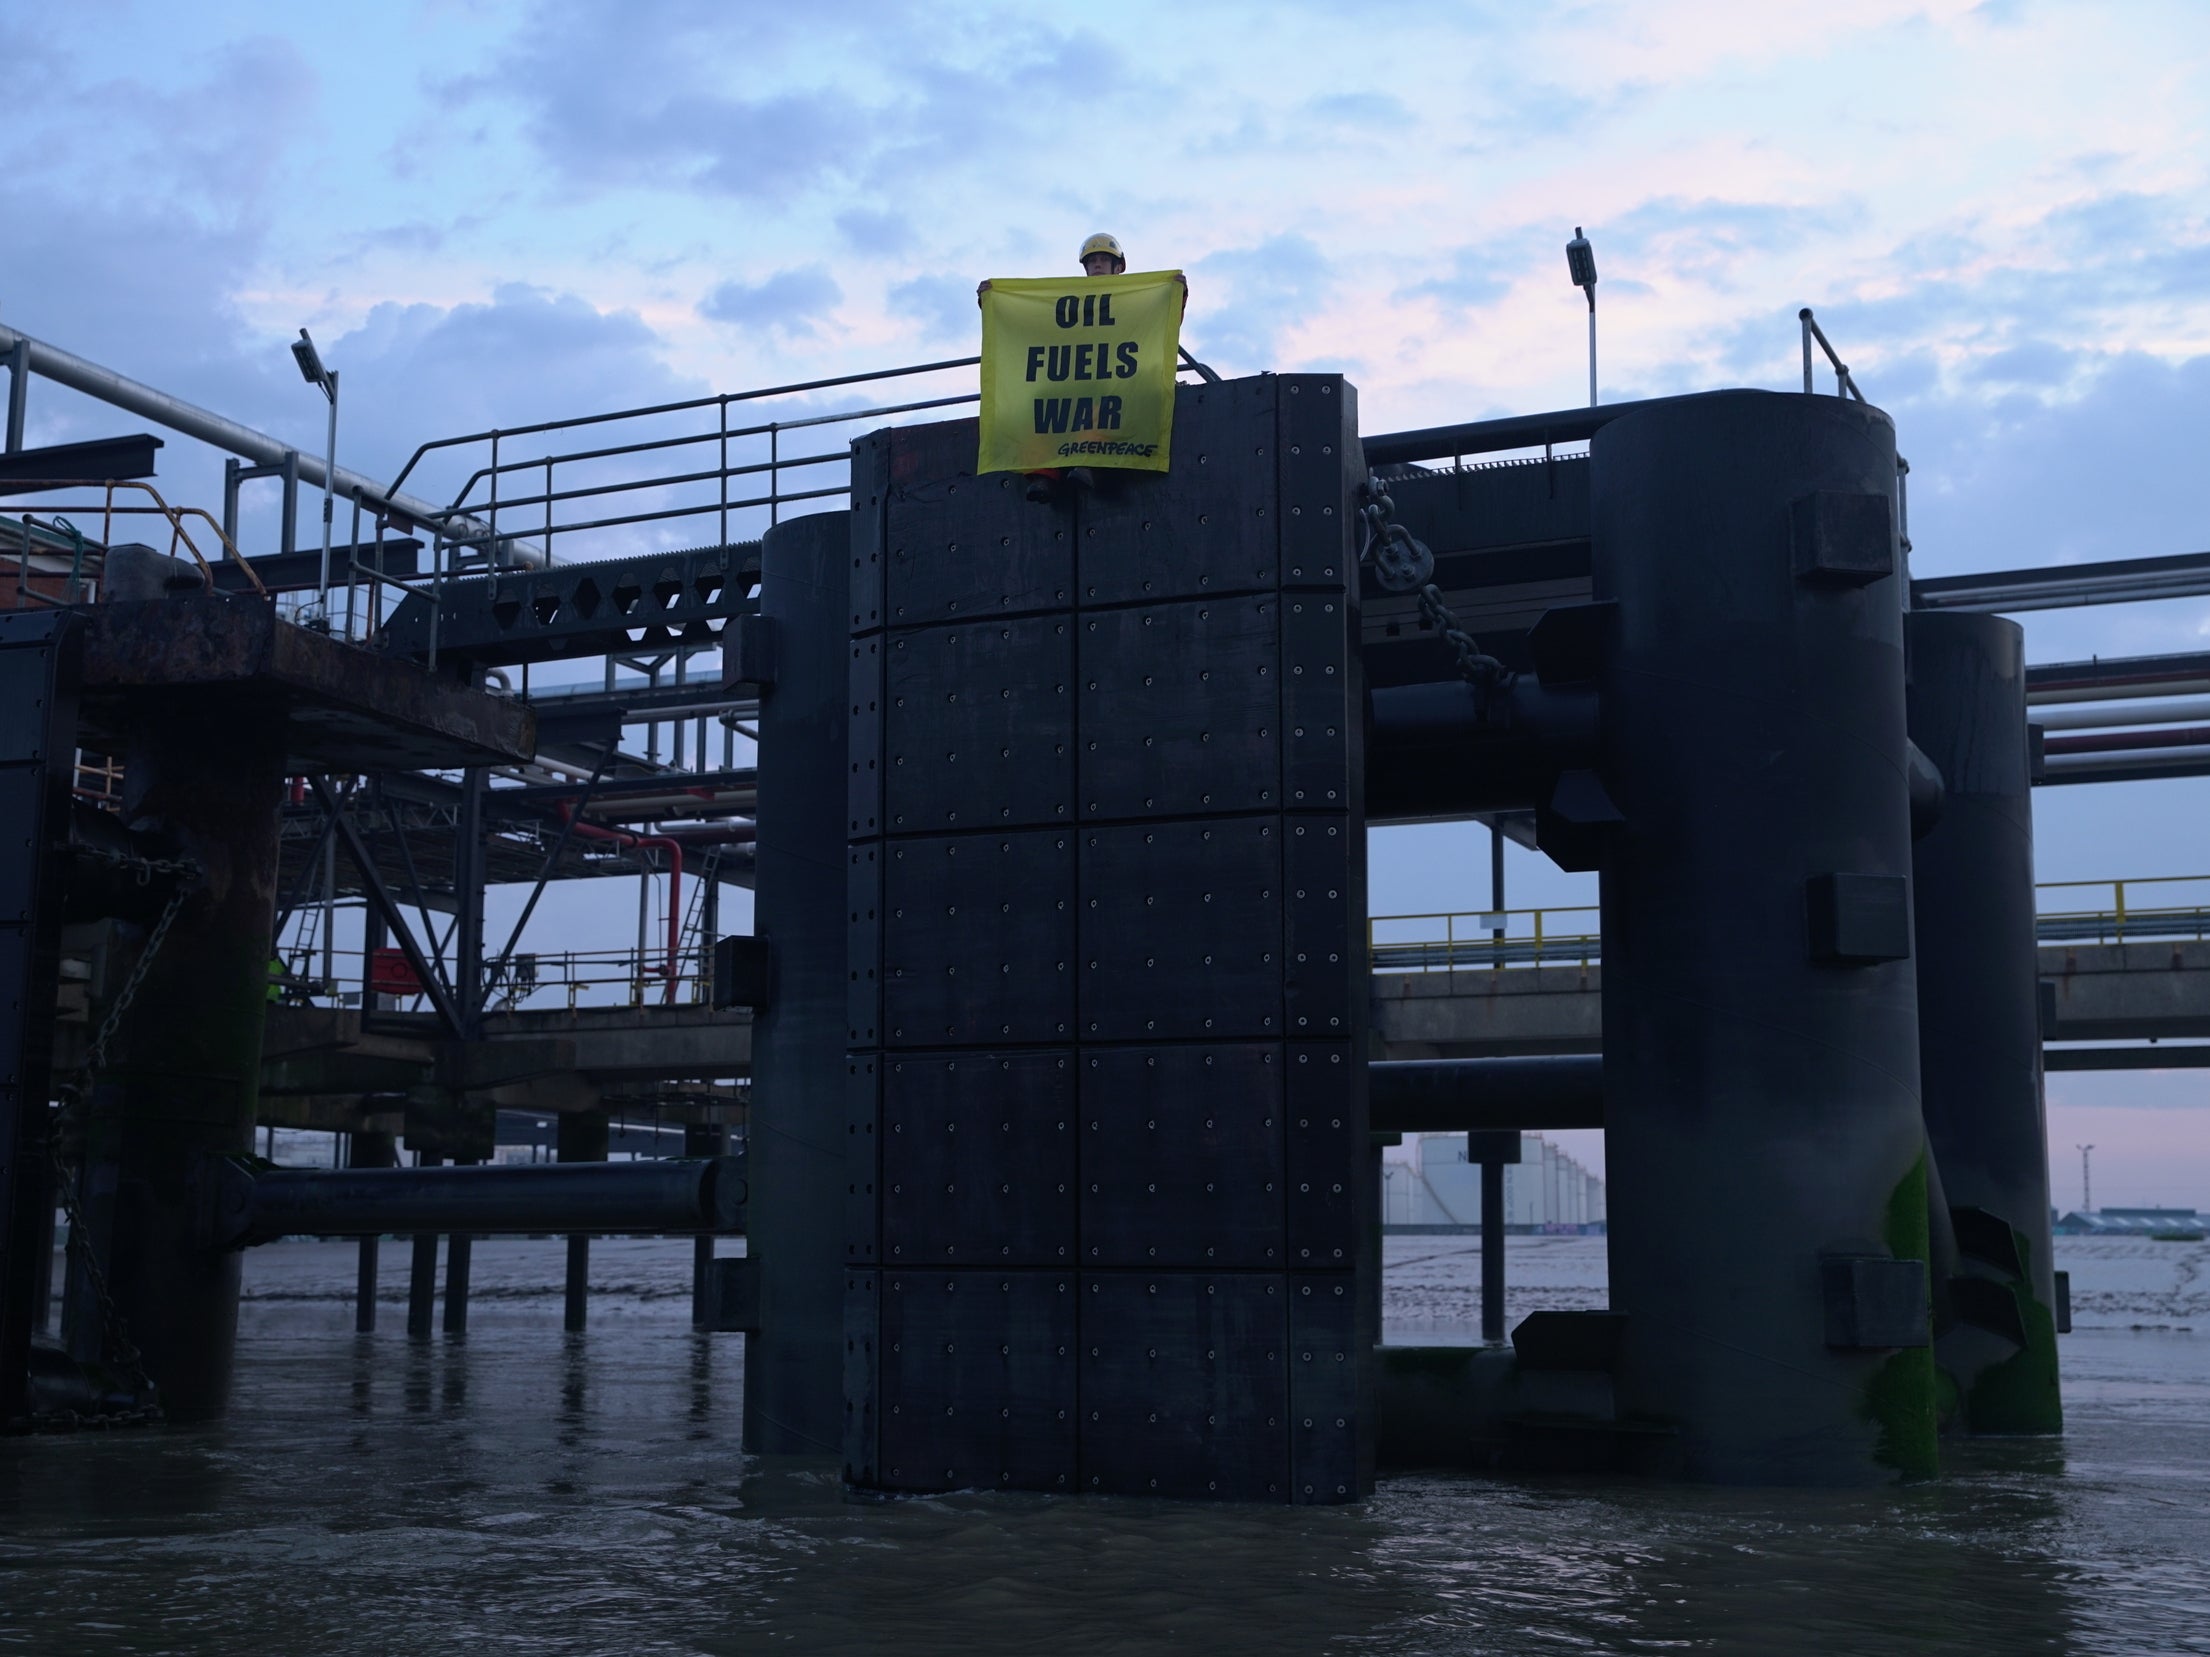 Greenpeace activists hold banner from docking site in Thames